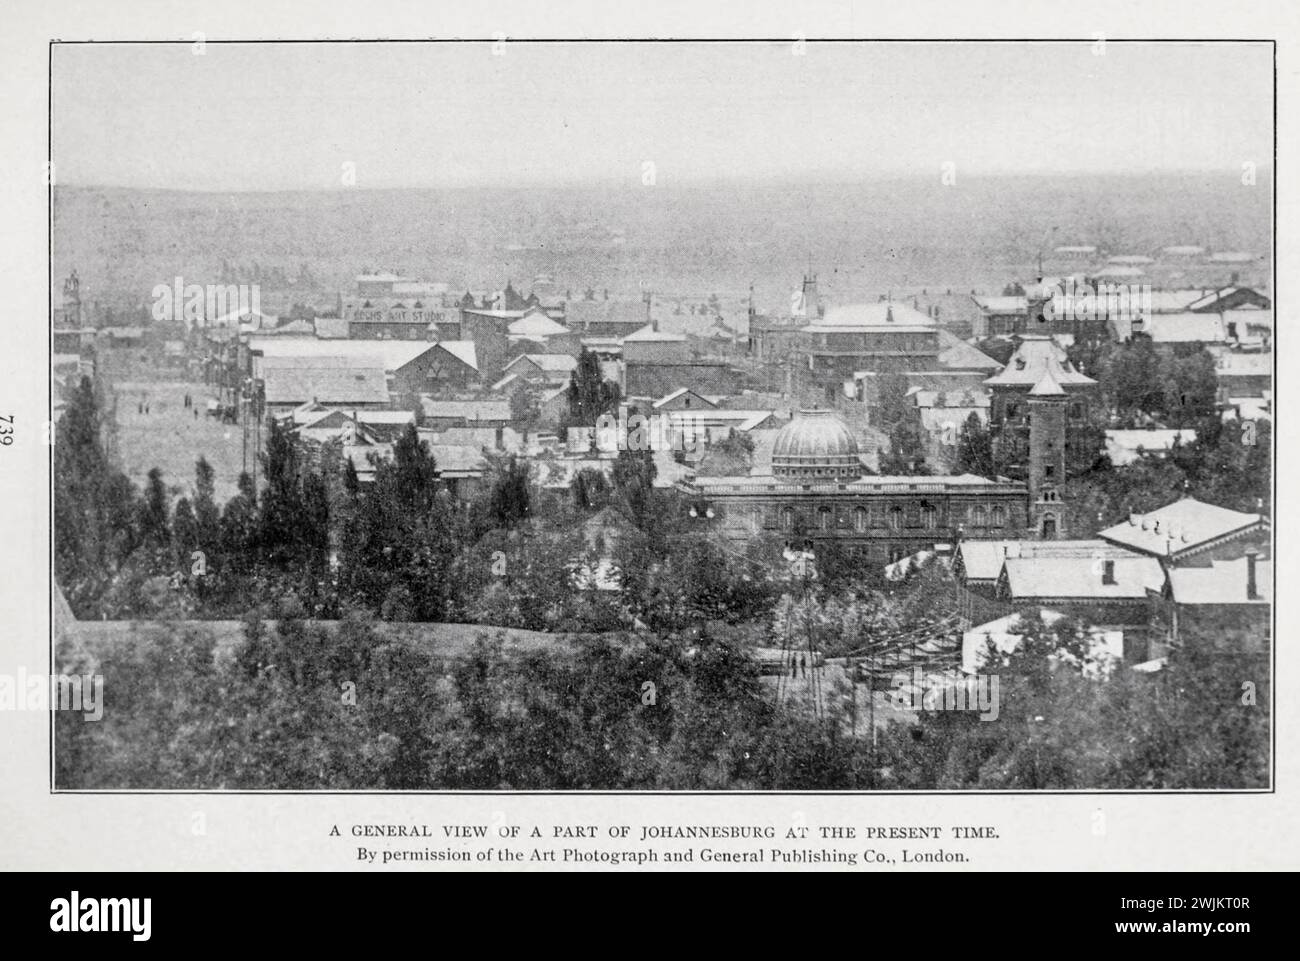 Johannesburg 1895 from the Article THE GOLD MINES OF THE WITWATERSRAND, SOUTH AFRICA. By John Hays Hammond. Part 1: THEIR RAPID DEVELOPMENT, AND THE GEOLOGY OF THE REGION. from The Engineering Magazine Devoted to Industrial Progress Volume XIV October 1897 - March 1898 The Engineering Magazine Co Stock Photo